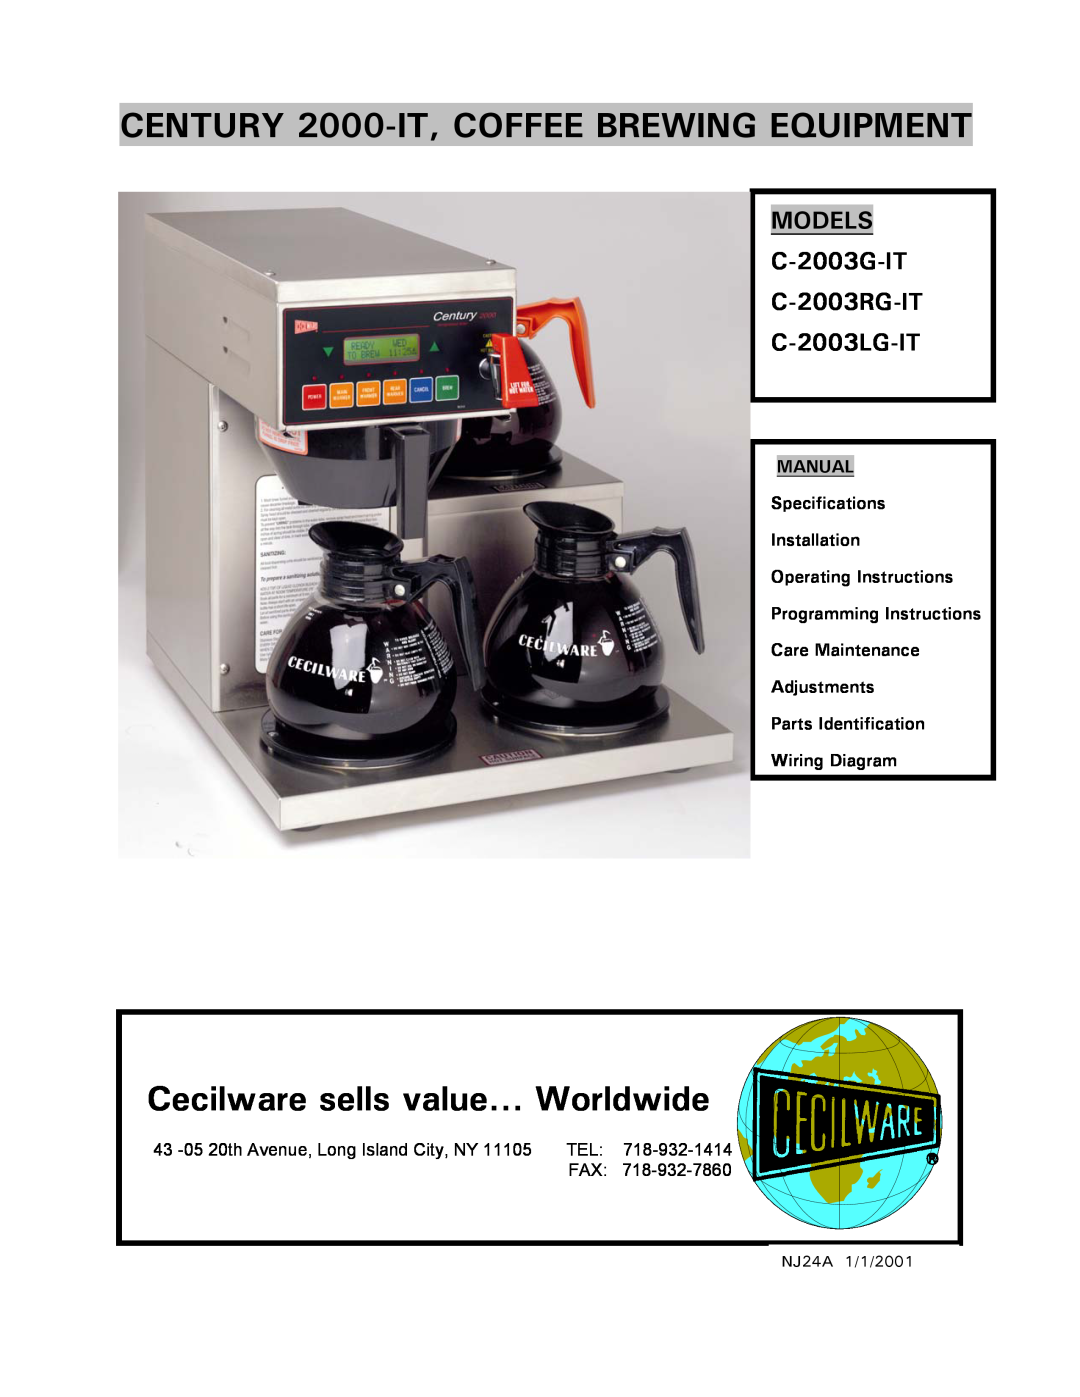 Cecilware specifications MODELS C-2003G-IT C-2003RG-IT C-2003LG-IT, CENTURY 2000-IT, COFFEE BREWING EQUIPMENT 